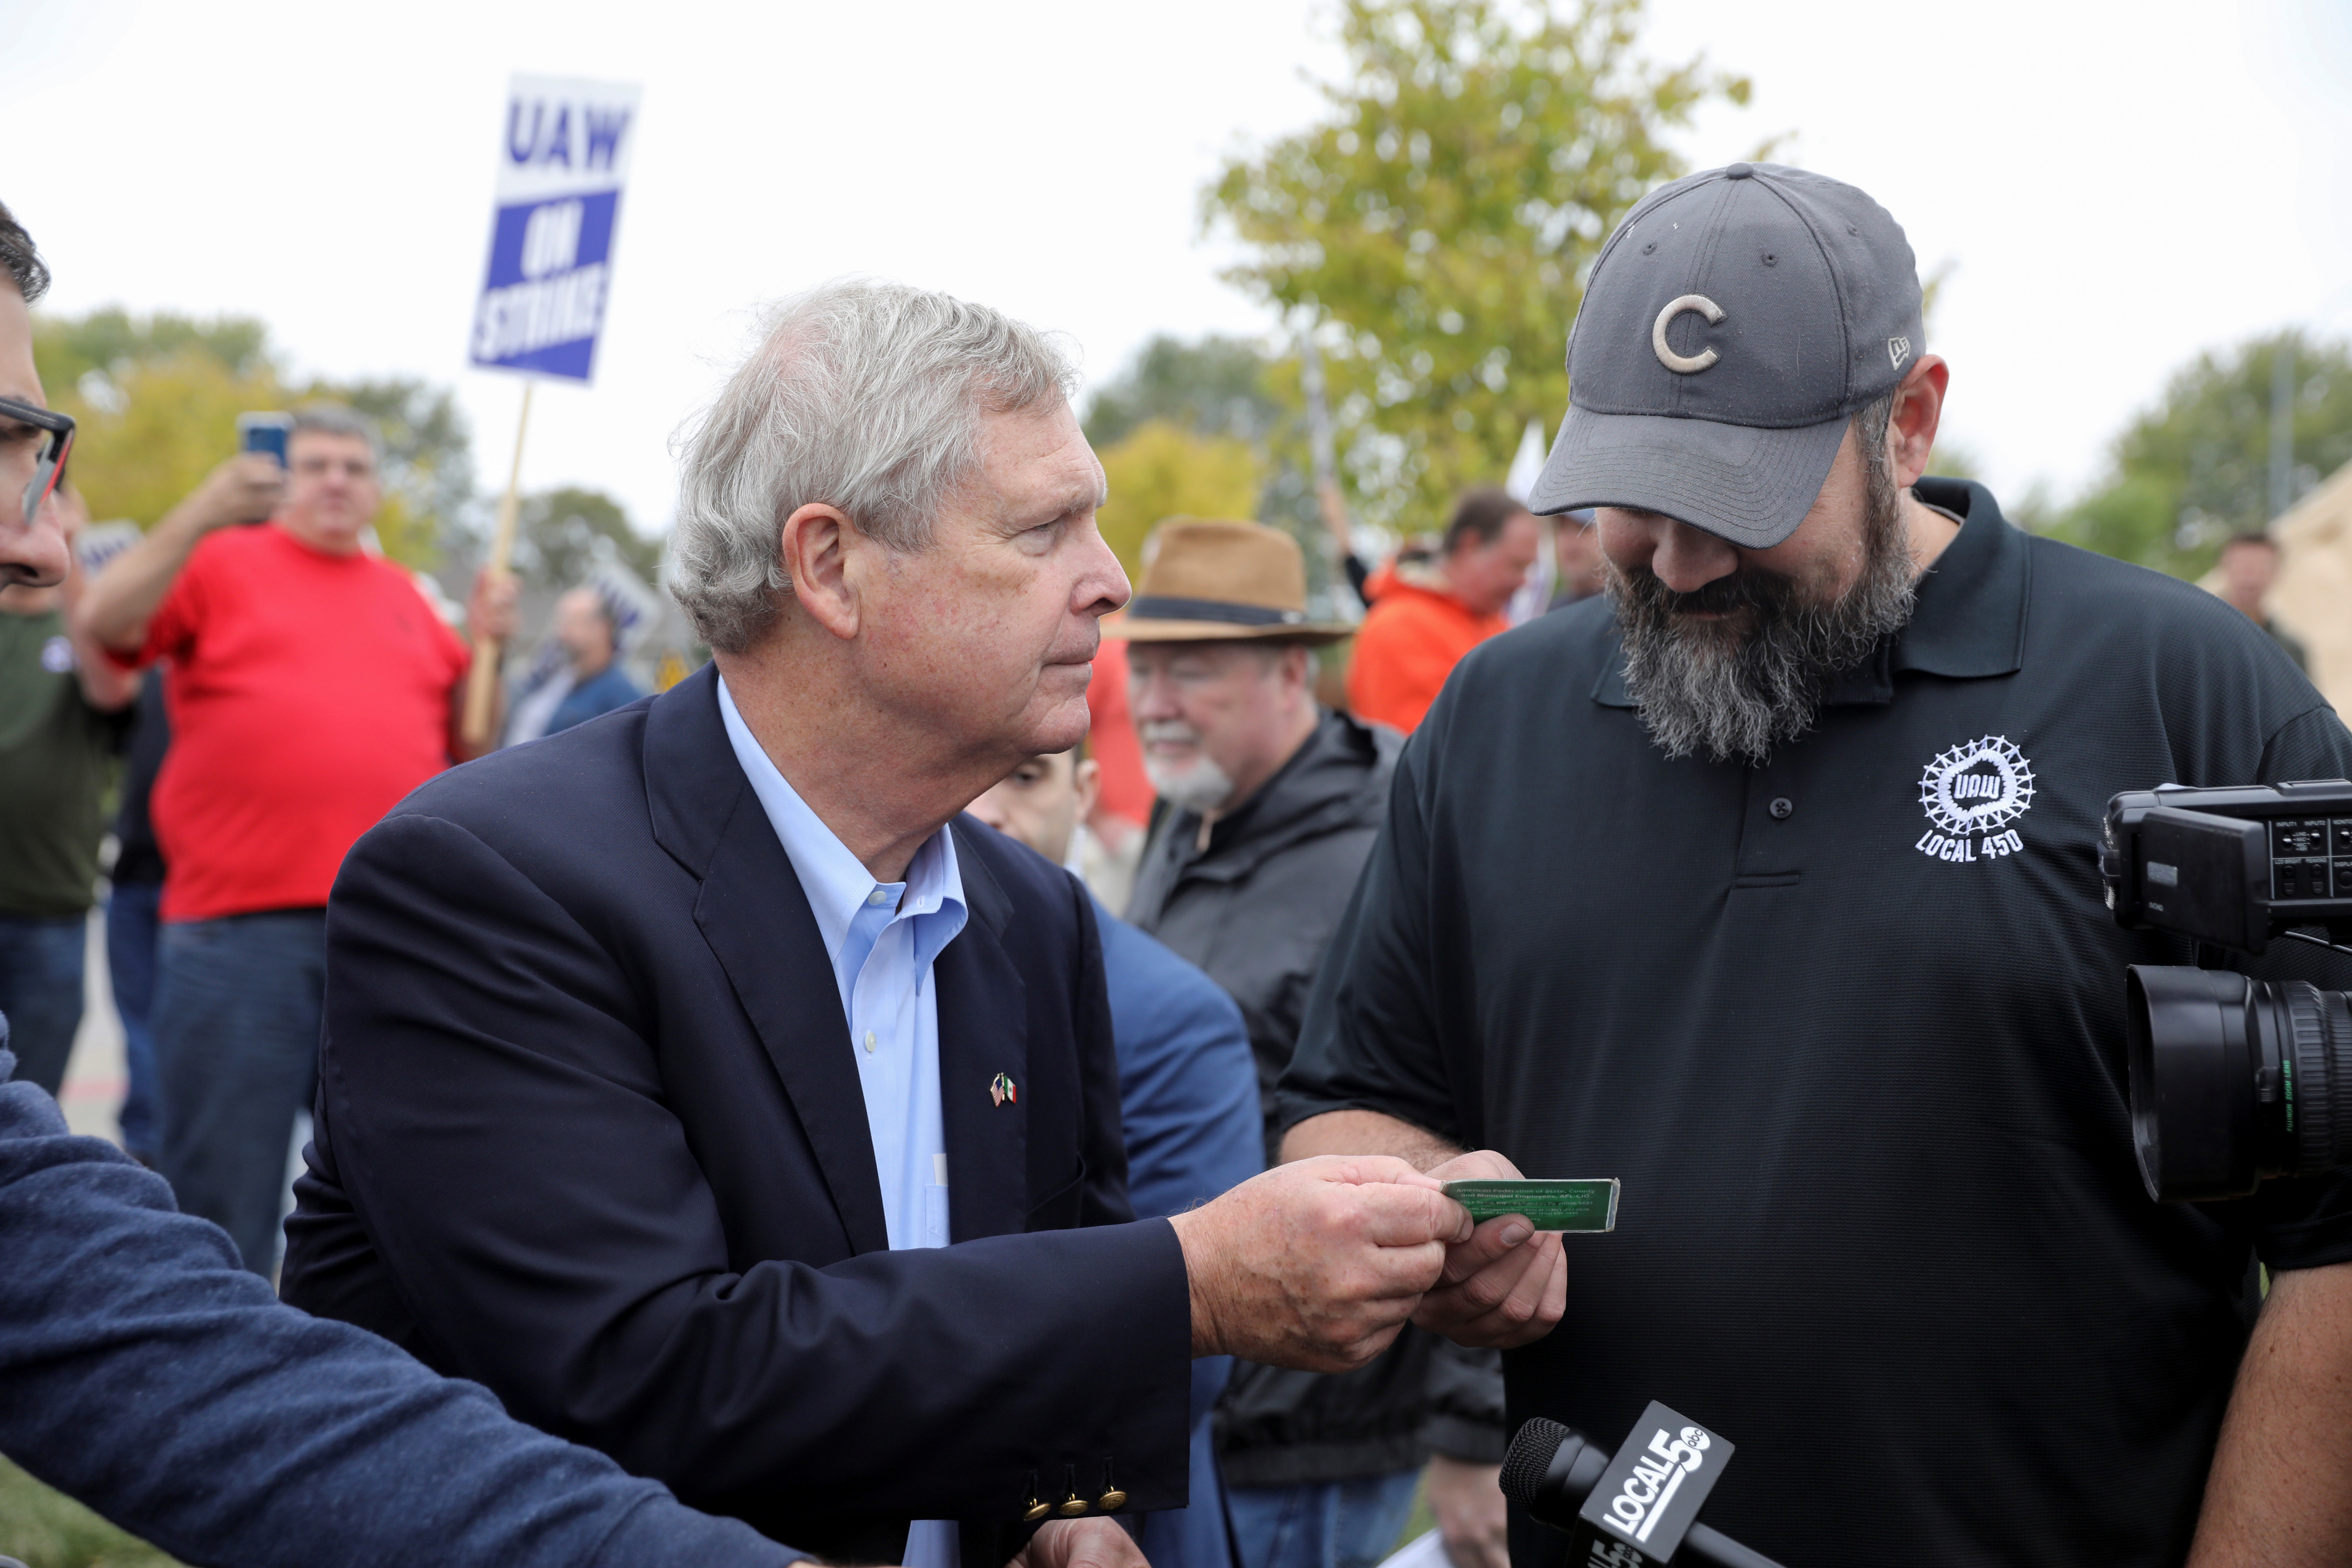 U.S. Agriculture Secretary Tom Vilsack shows his union membership card to Justin Limke as he visits striking members of the United Auto Workers (UAW) at the Deere & Co farm equipment plant in Ankeny, Iowa